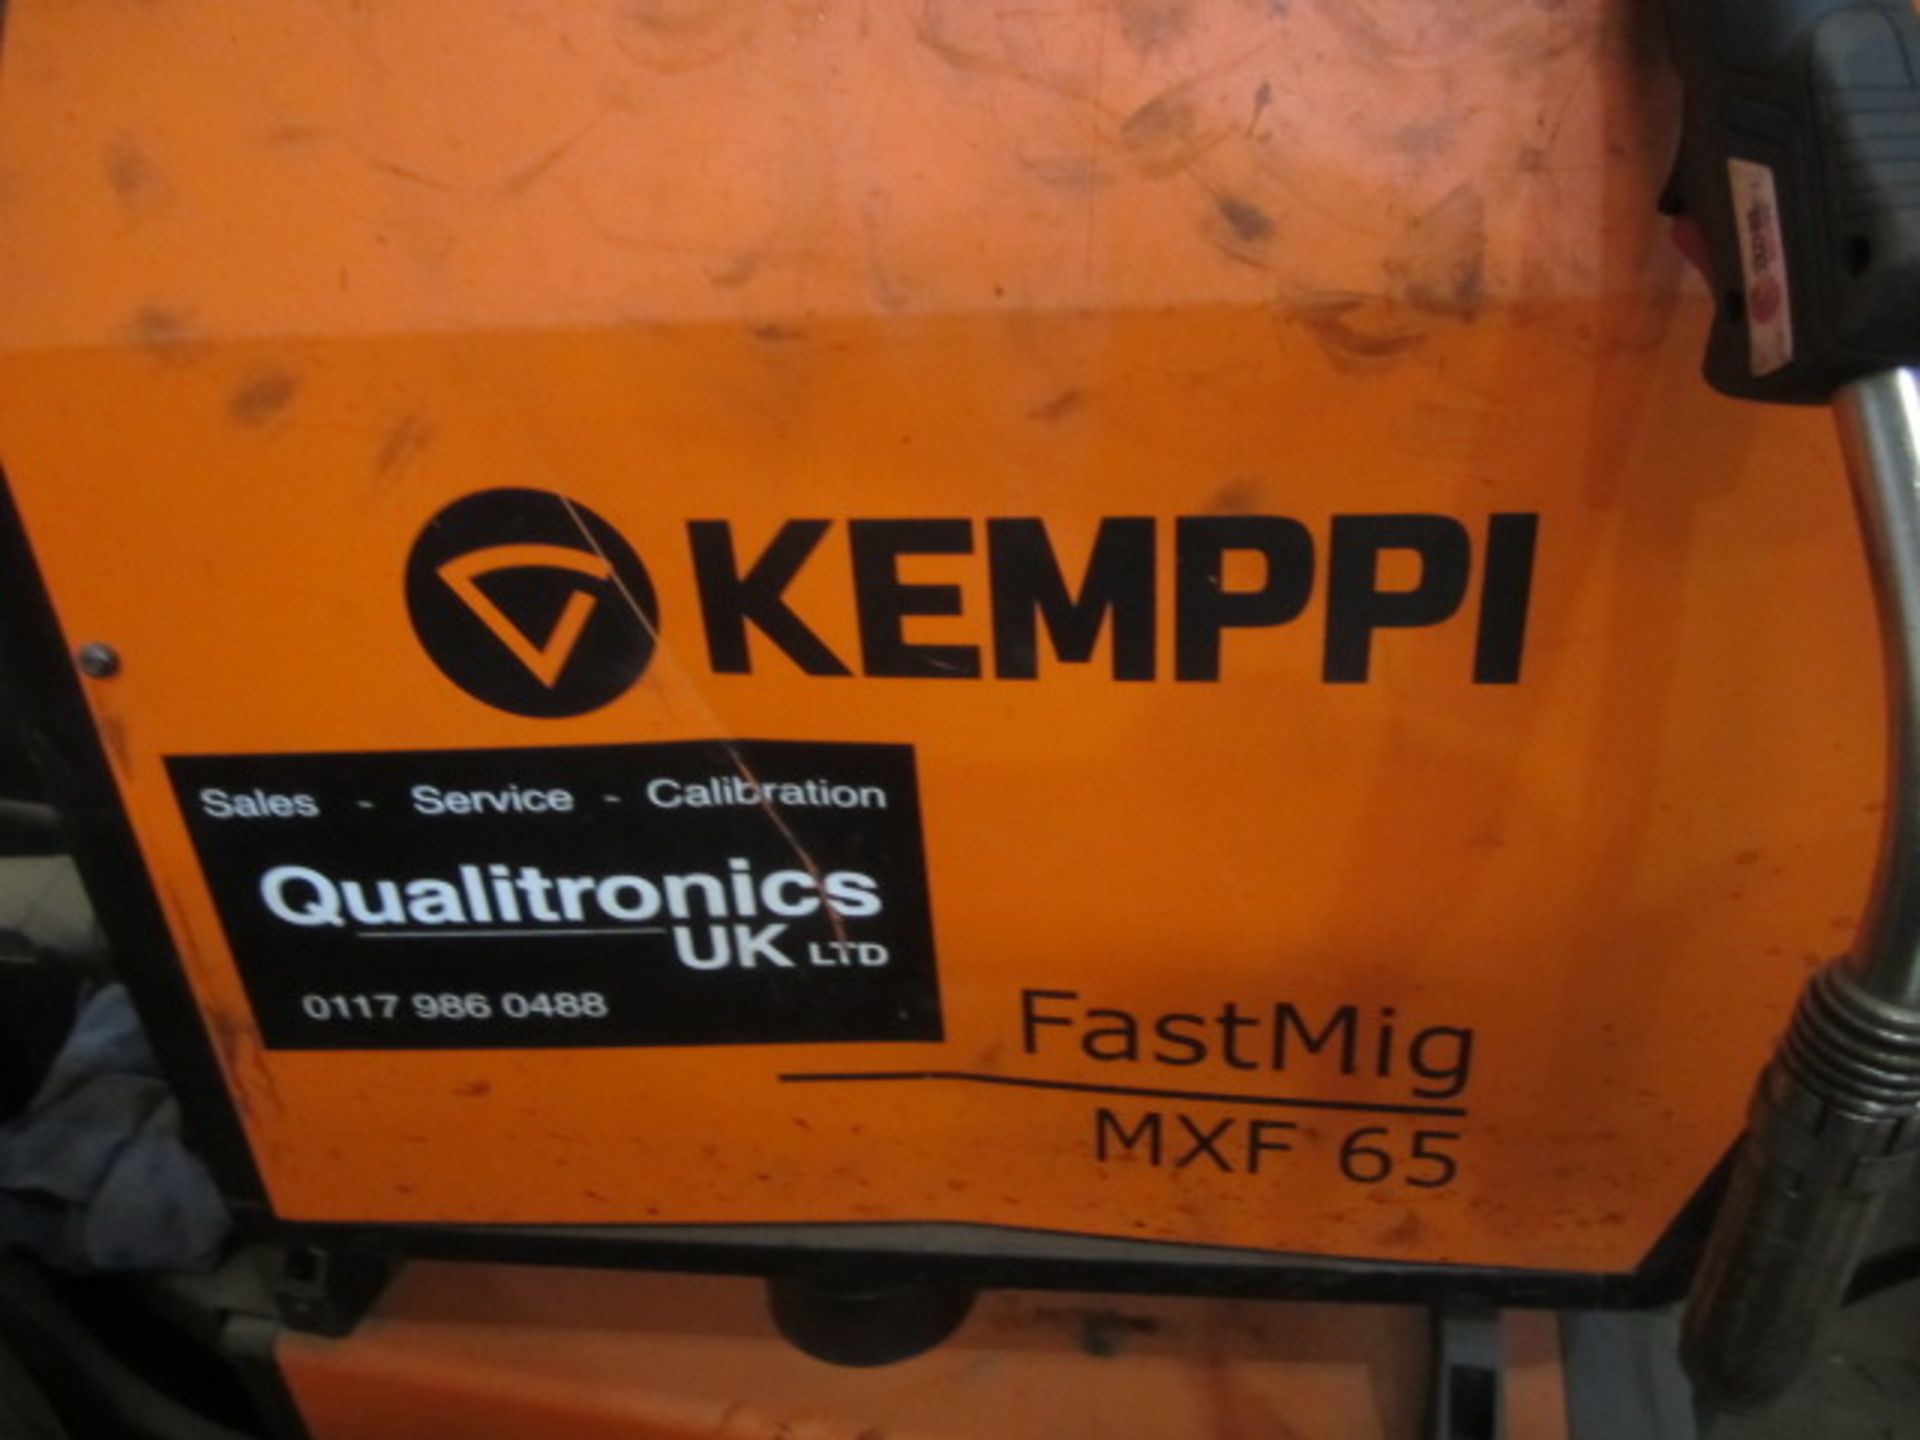 Kemppi Fast Mig M420 mig welder, serial no. 2694681, with Fast Mig MXF65 wire feeder, serial no. - Image 3 of 5